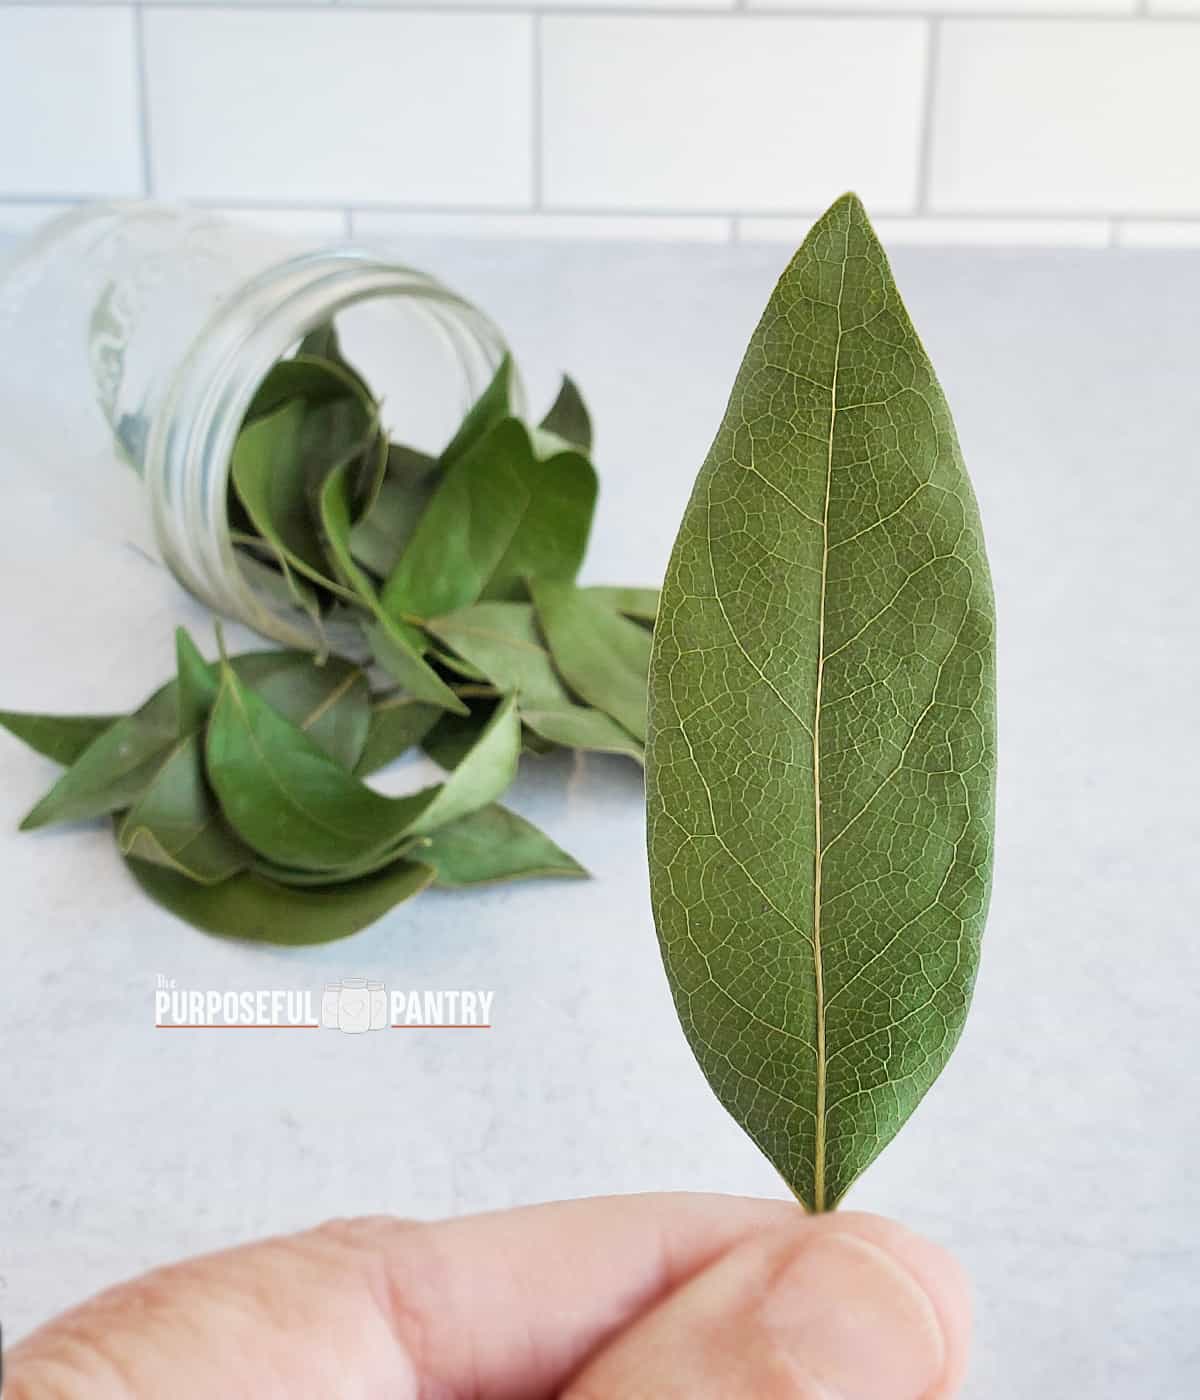 Dried bay leaf in the foreground with a jar of dried bay leaves on a kitchen countertop